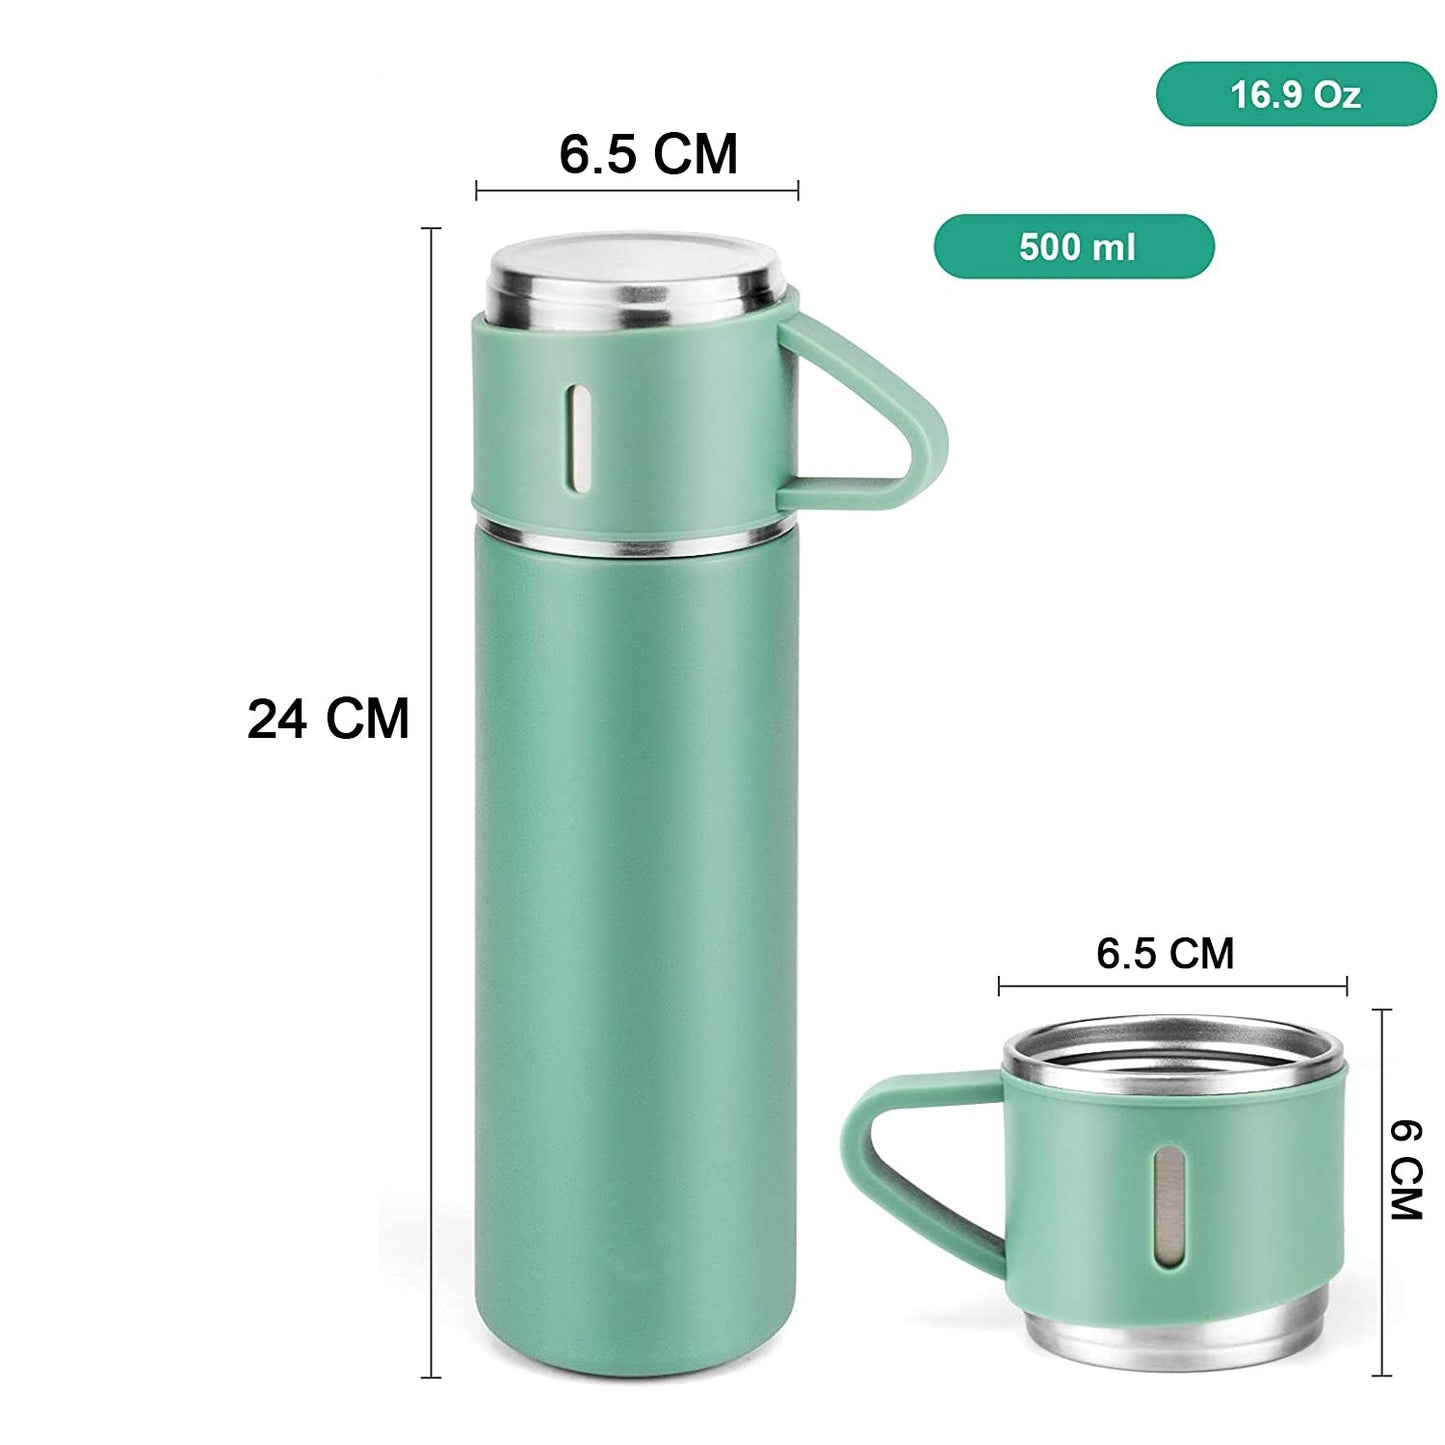 2834 Stainless Steel Vacuum Flask Set with 3 Steel Cups Combo for Coffee Hot Drink and Cold Water Flask Ideal Gifting Travel Friendly Latest Flask Bottle. (500ml)